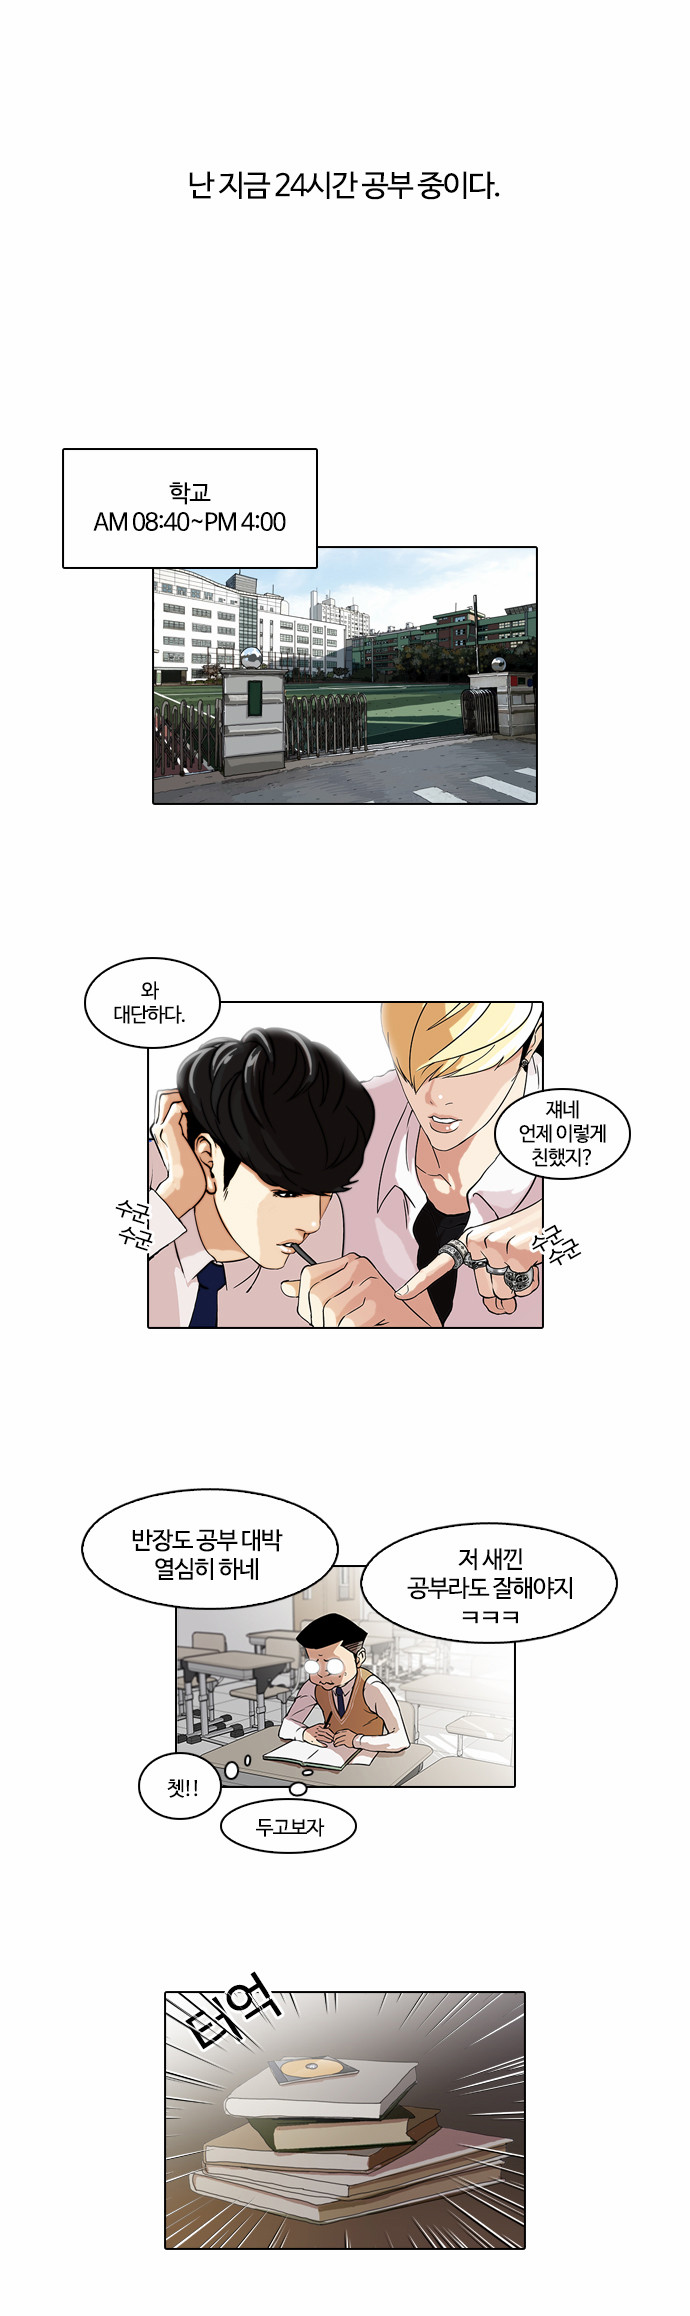 Lookism - Chapter 40 - Page 1